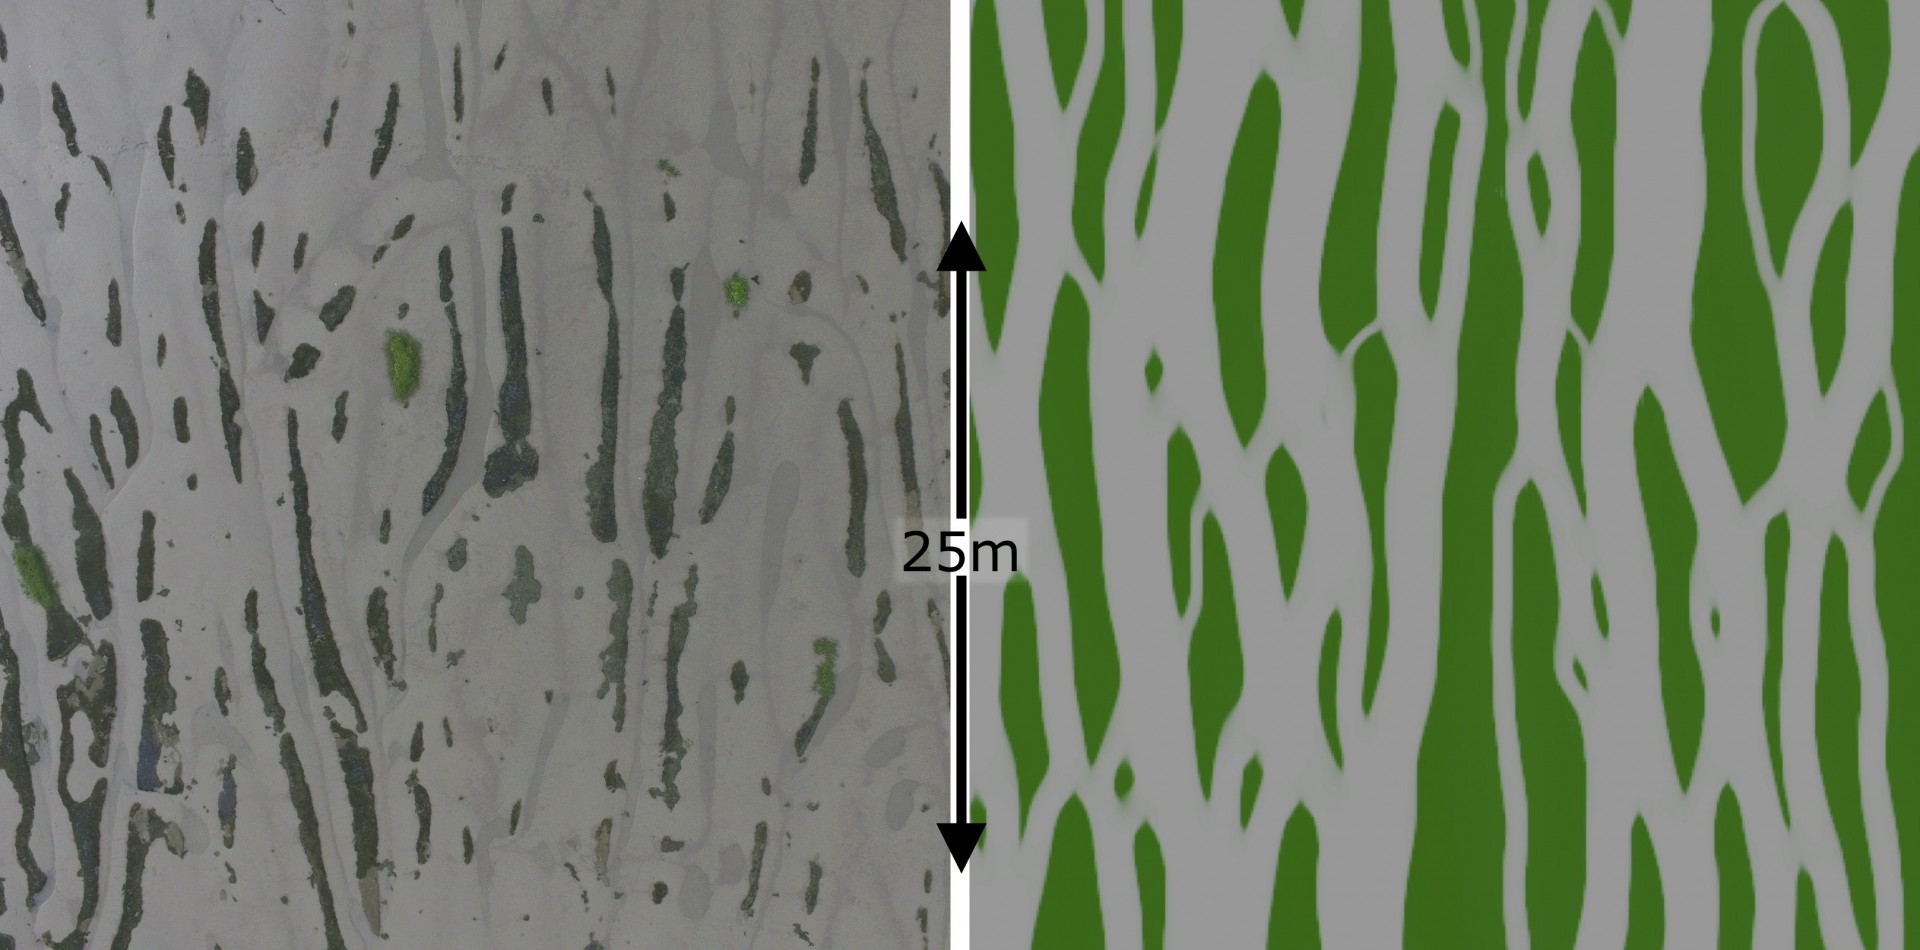 Algae create self-organised bedforms on tidal flats, enhancing drainage. Bedforms observed with a drone (left) and simulated in a numerical model (right).